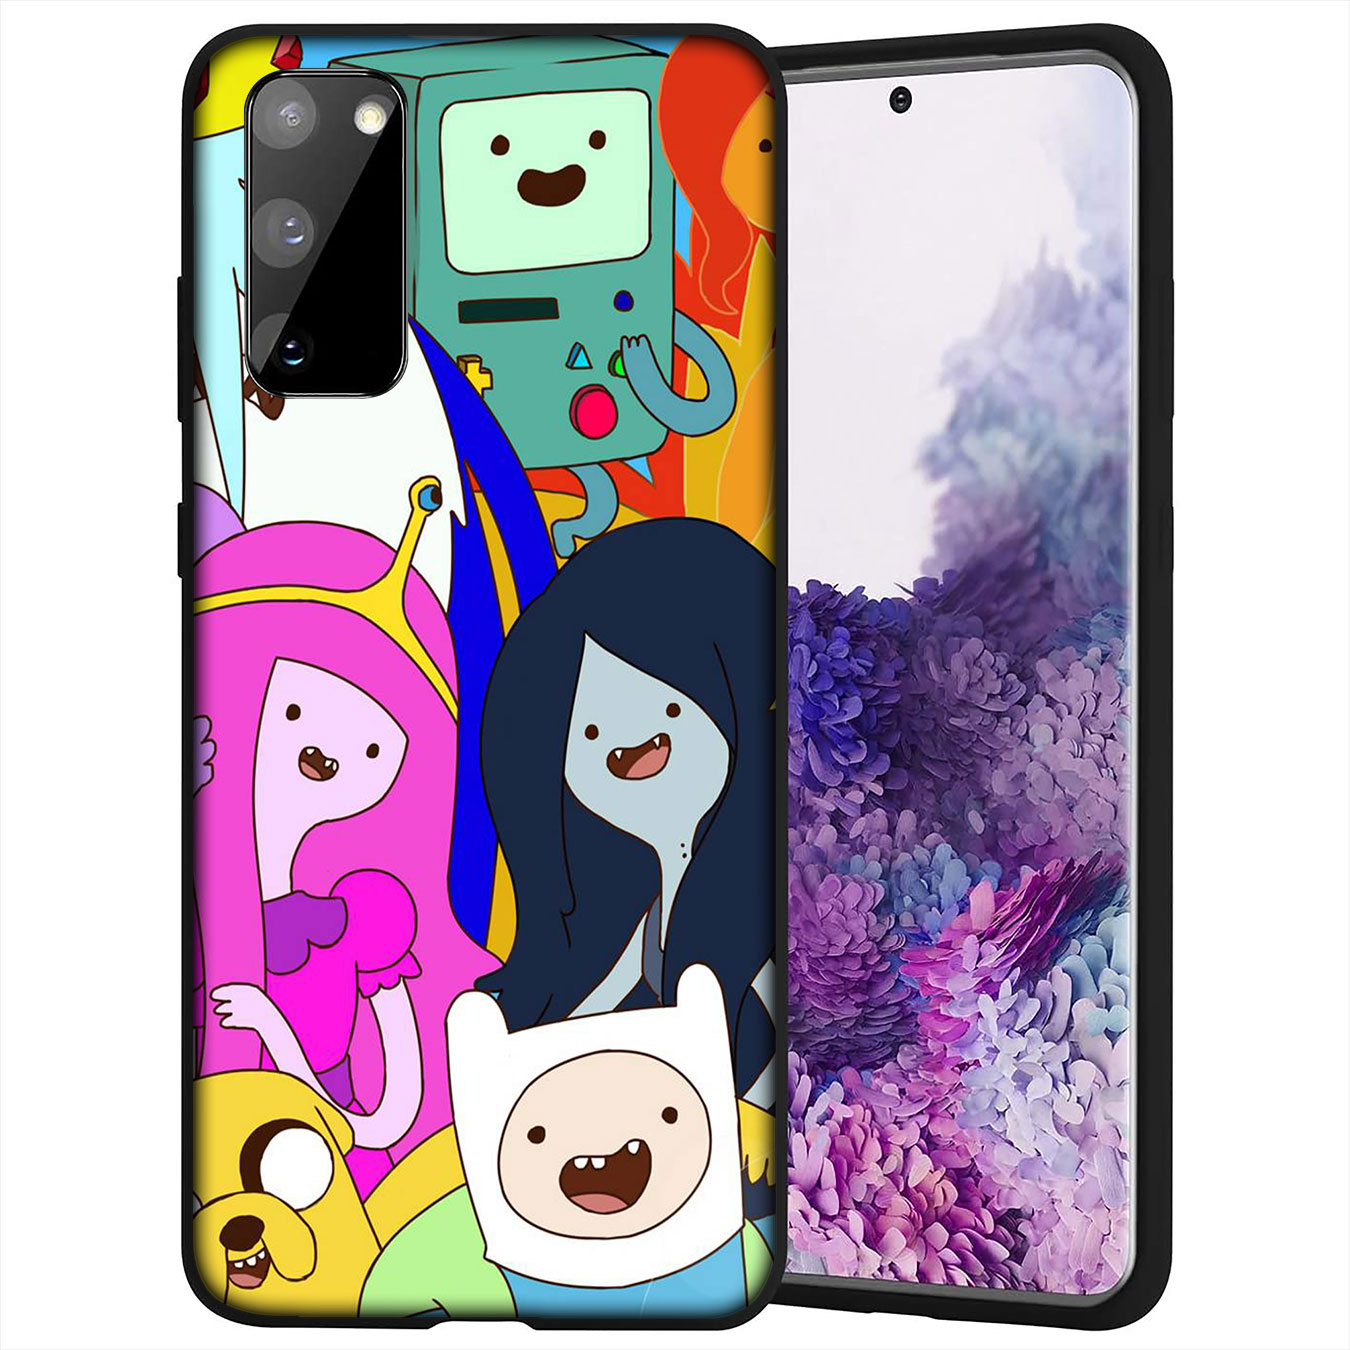 Samsung Galaxy A9 A8 A7 A6 Plus J8 2018 + A21S A70 M20 A6+ A8+ 6Plus Casing Soft Silicone adventure time Phone Case